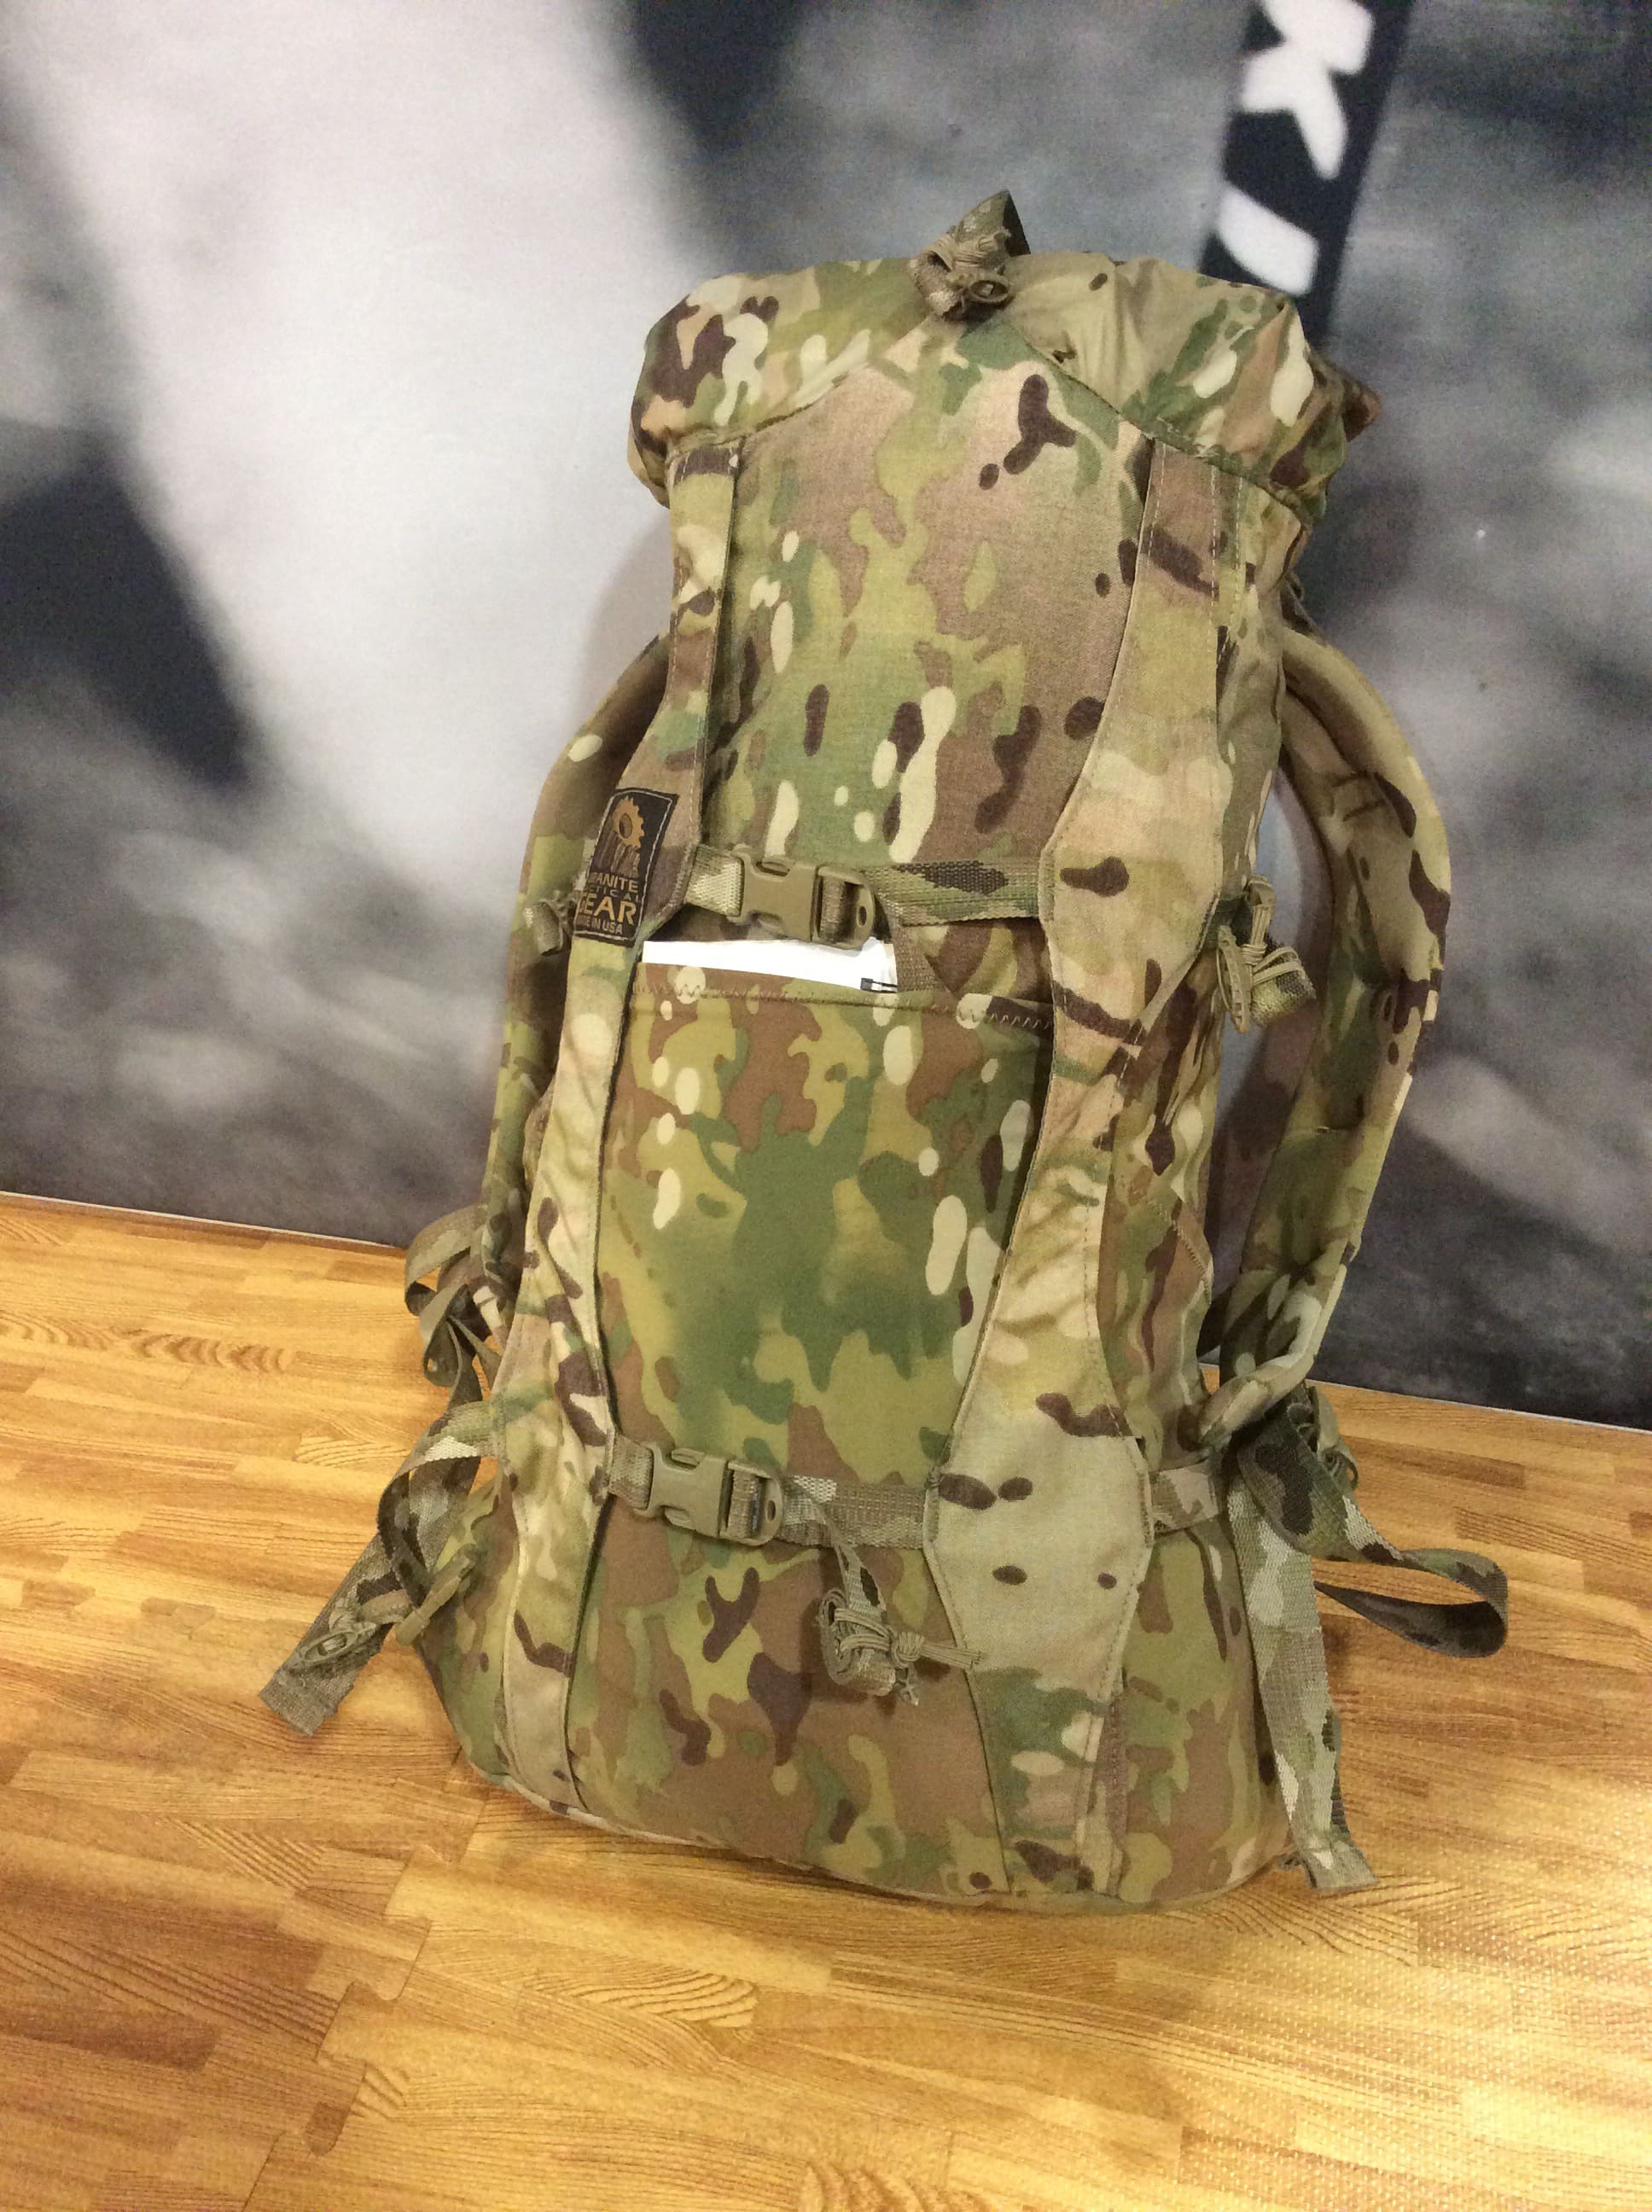 OR – Granite Gear 223 Pack - Soldier Systems Daily